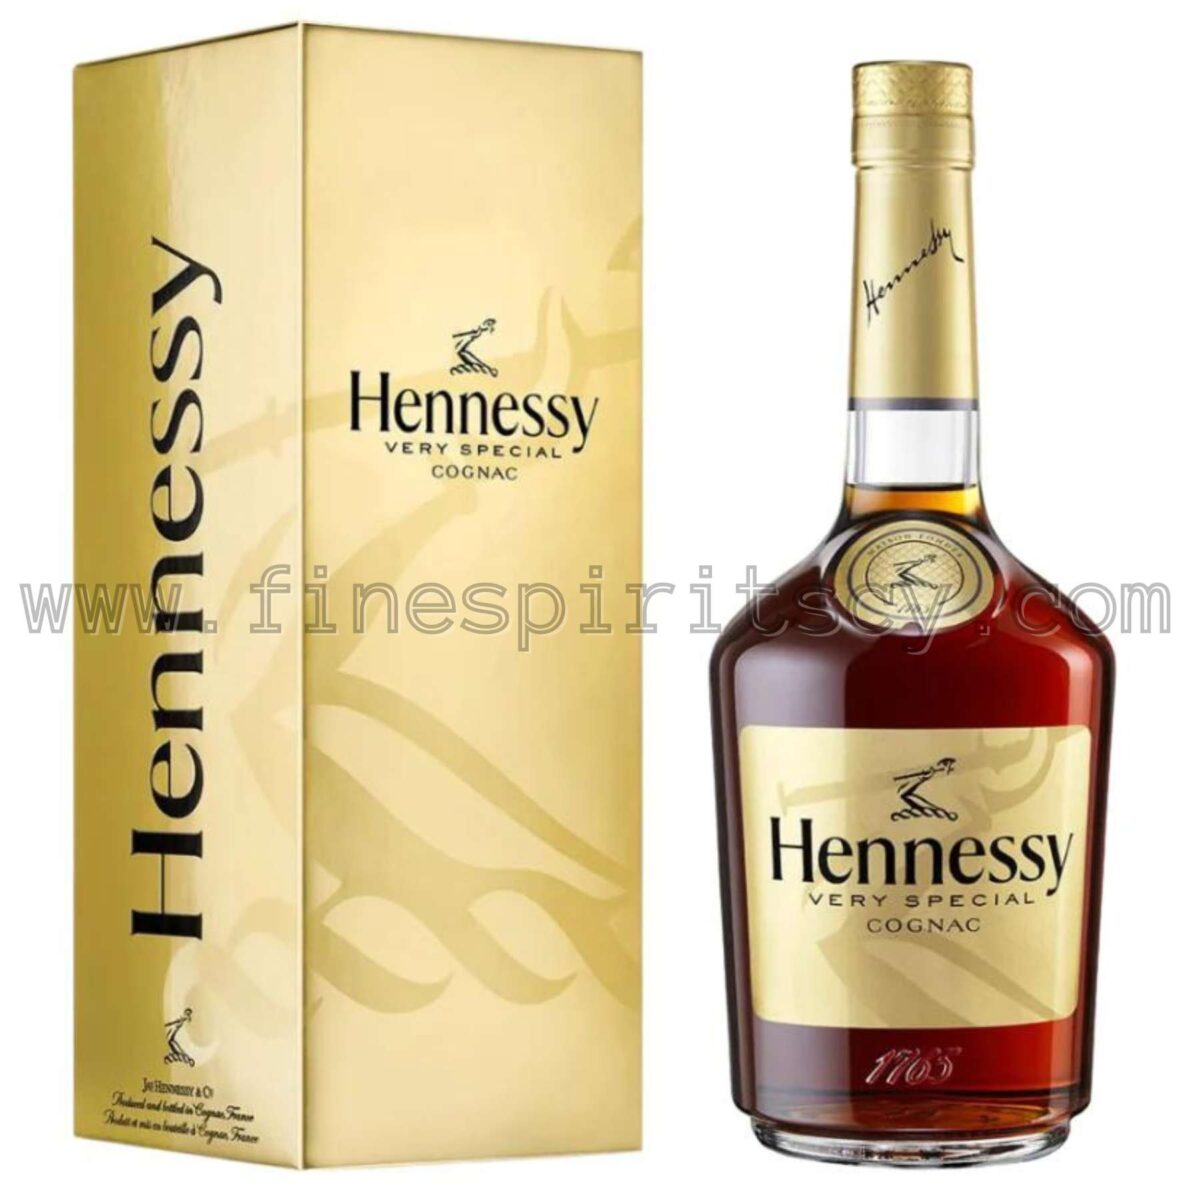 Hennessy Very Special V.S. 700ml 70cl 0.7L Cognac Order Online Price Shop Buy